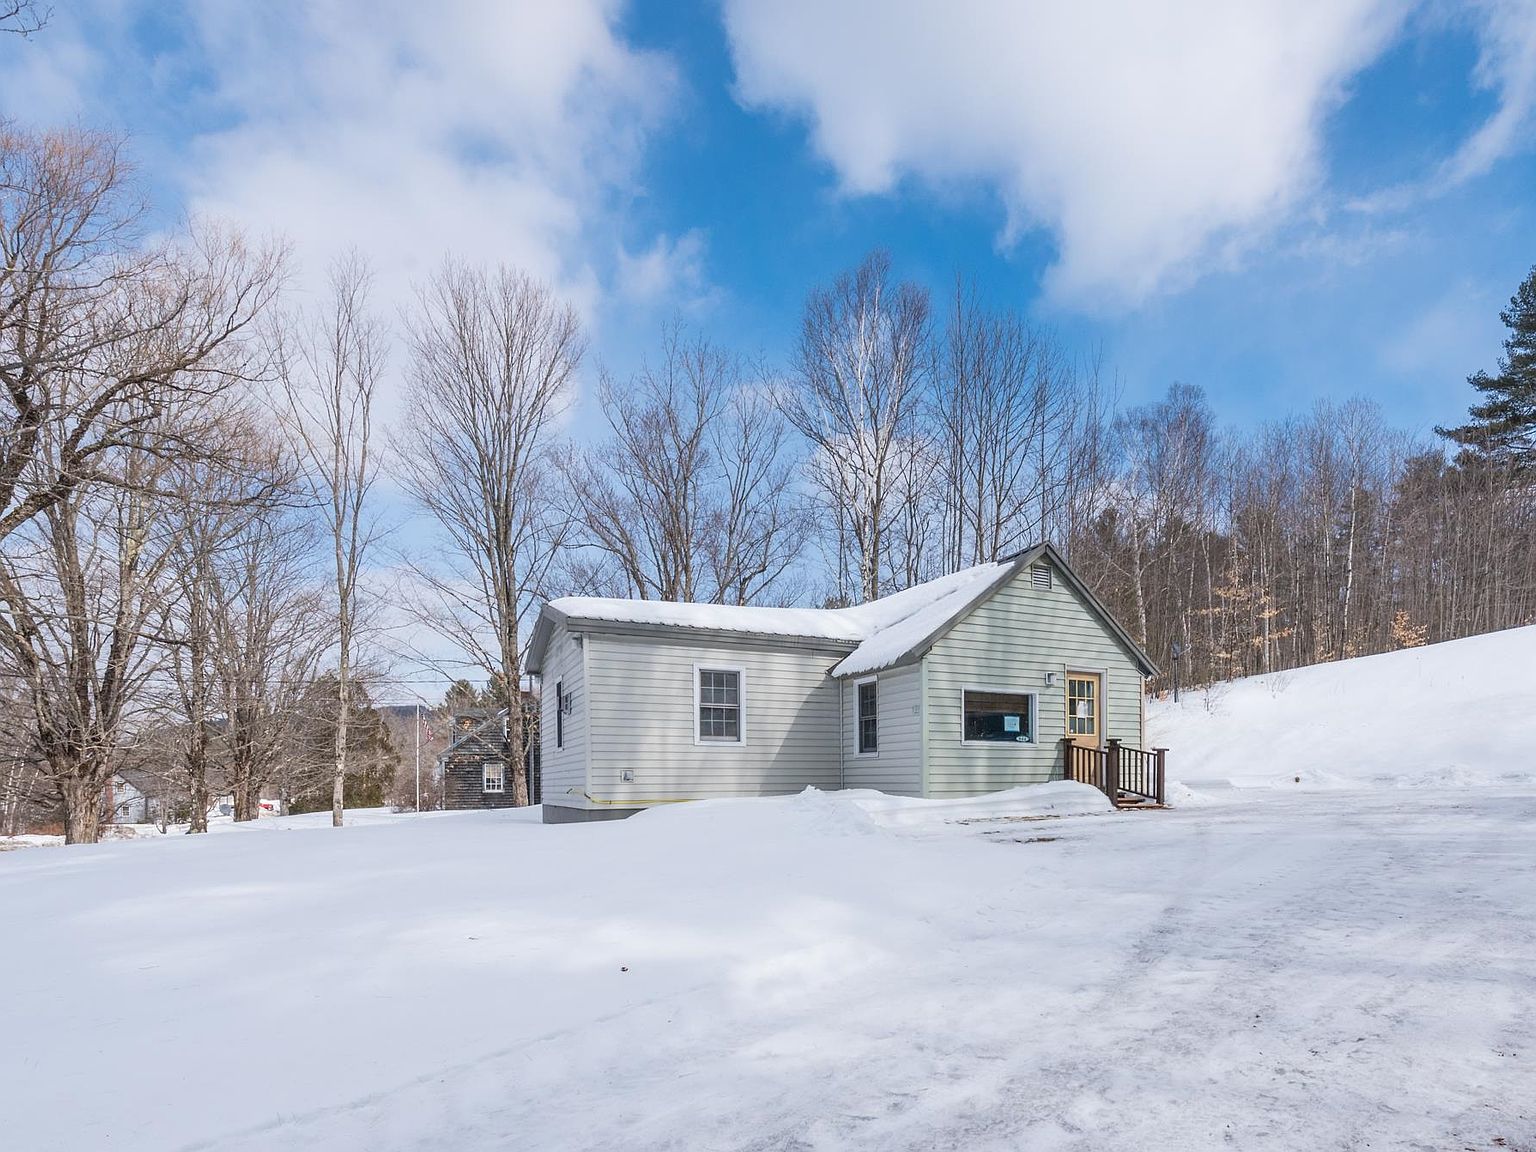 644 Four Corners Road, Springfield, NH 03284 | MLS #4898188 | Zillow